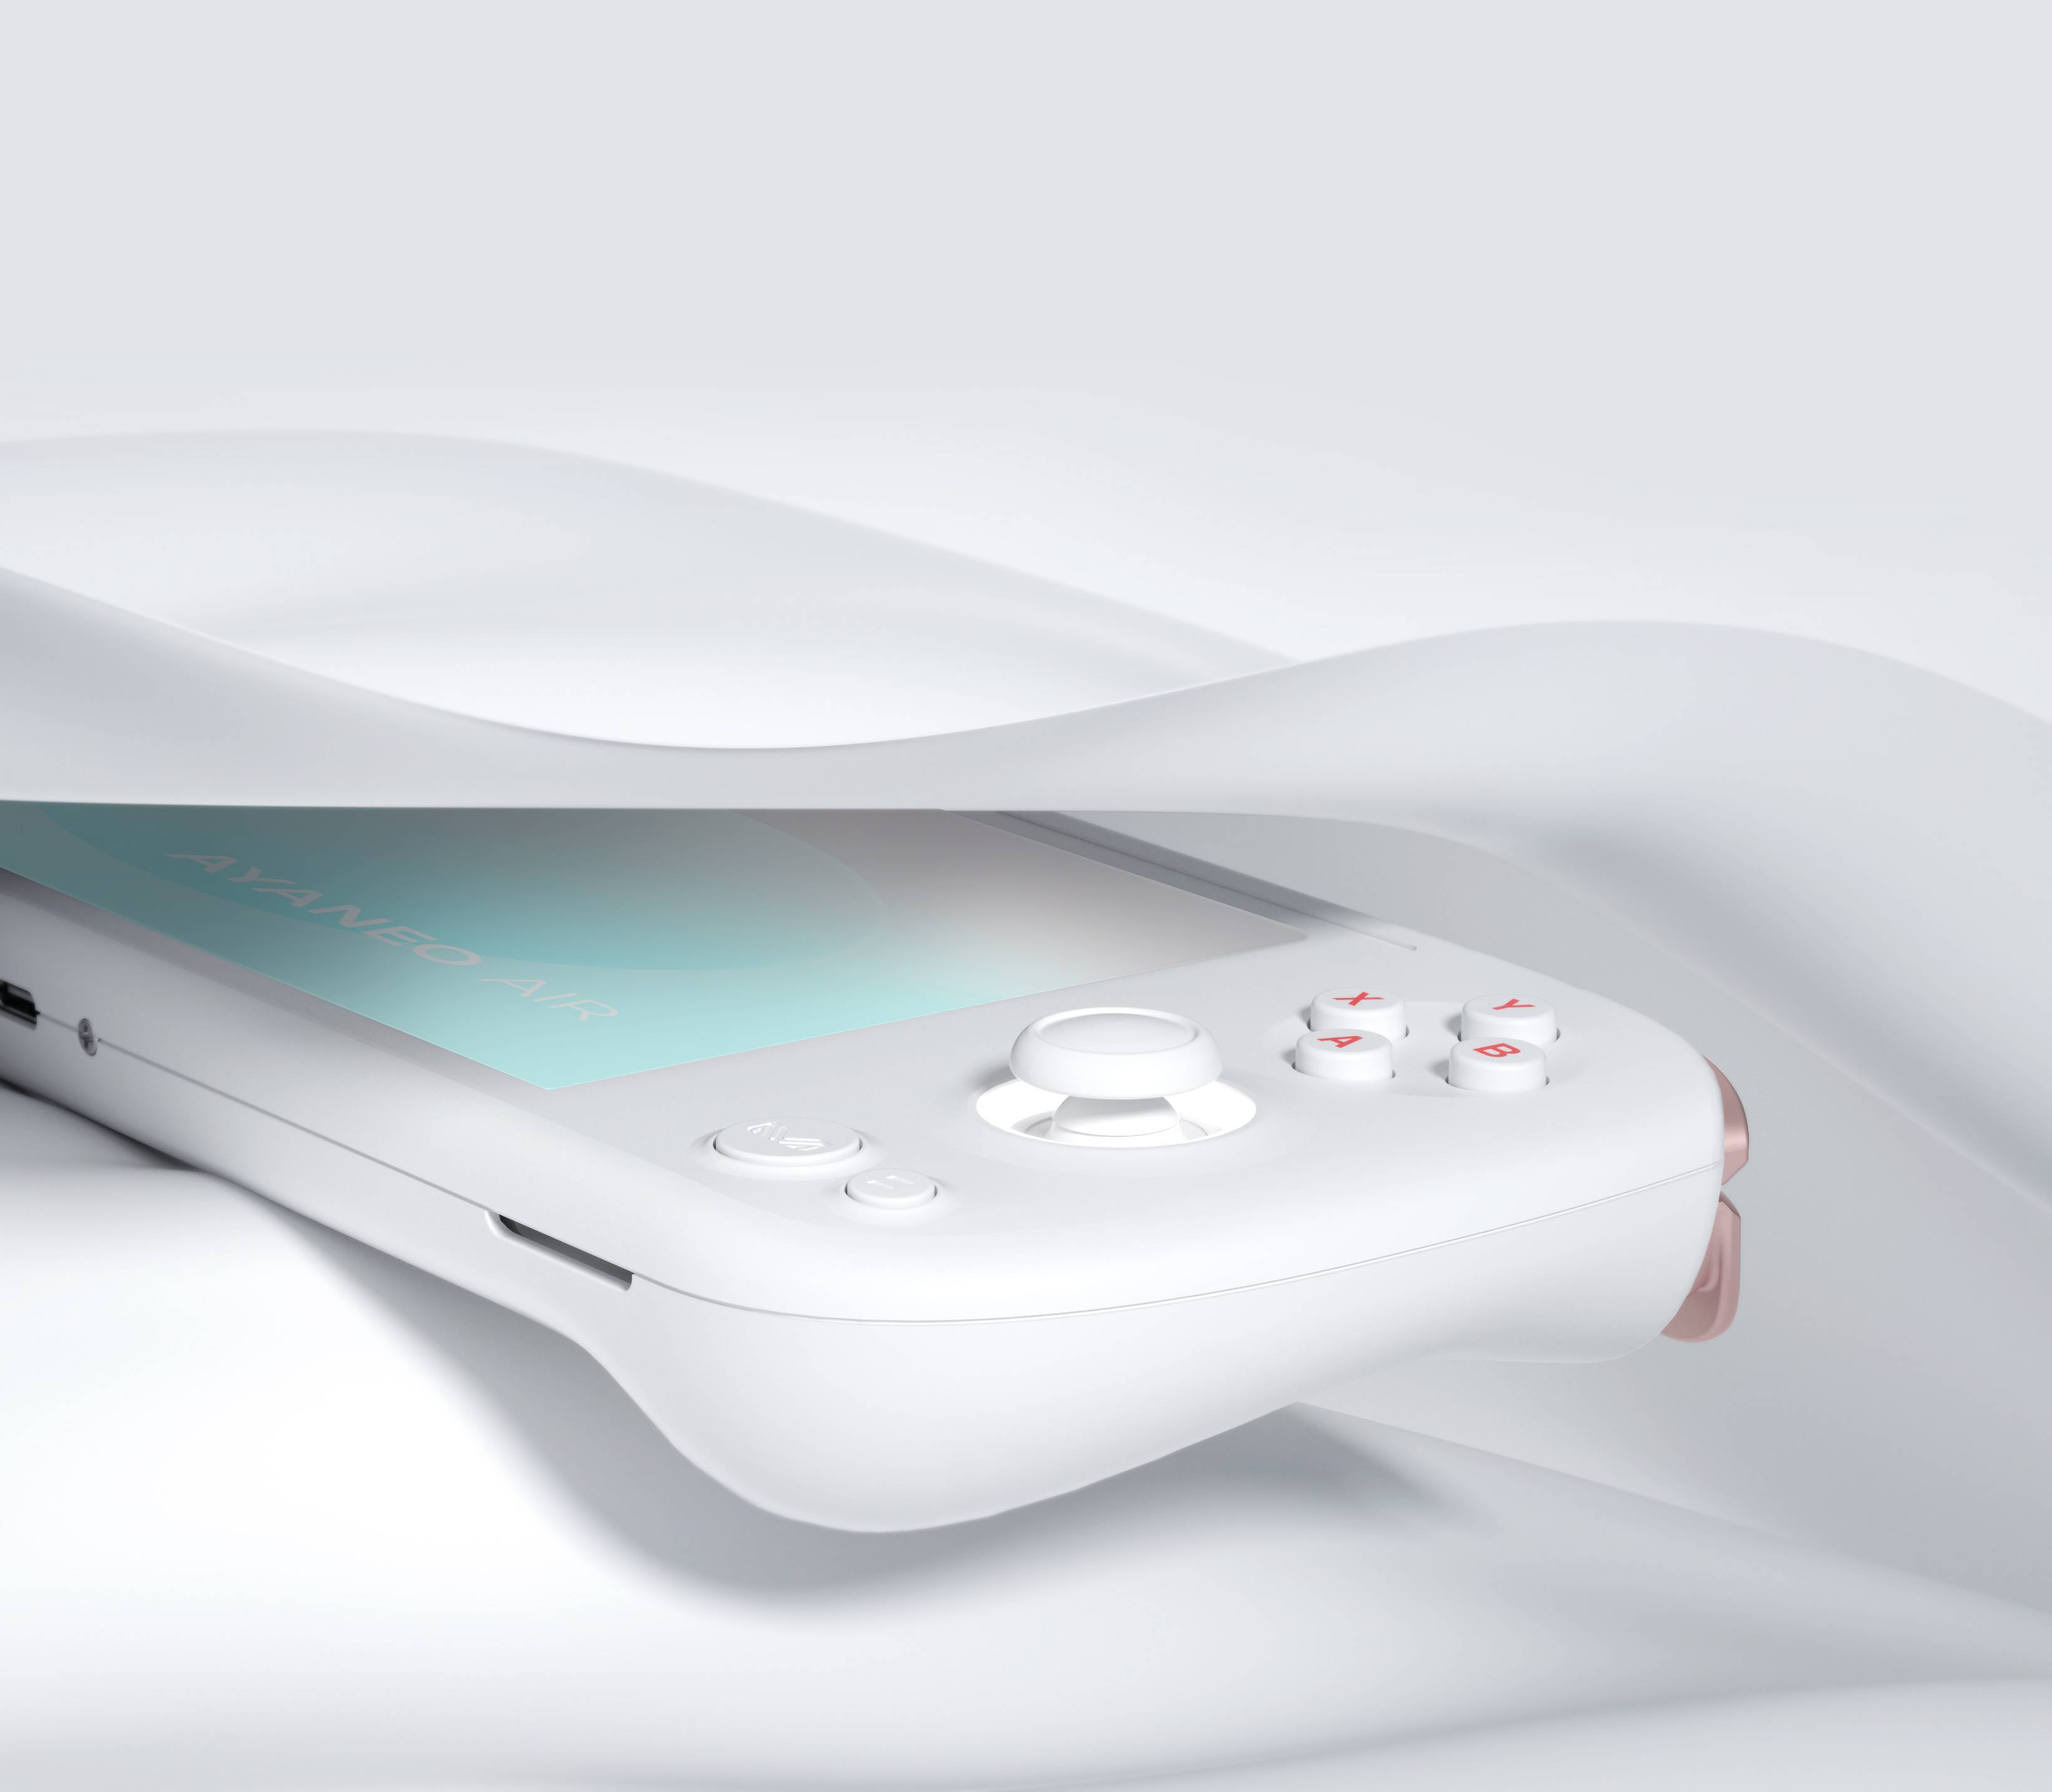 AYANEO: World's First 7nm Handheld Gaming Device